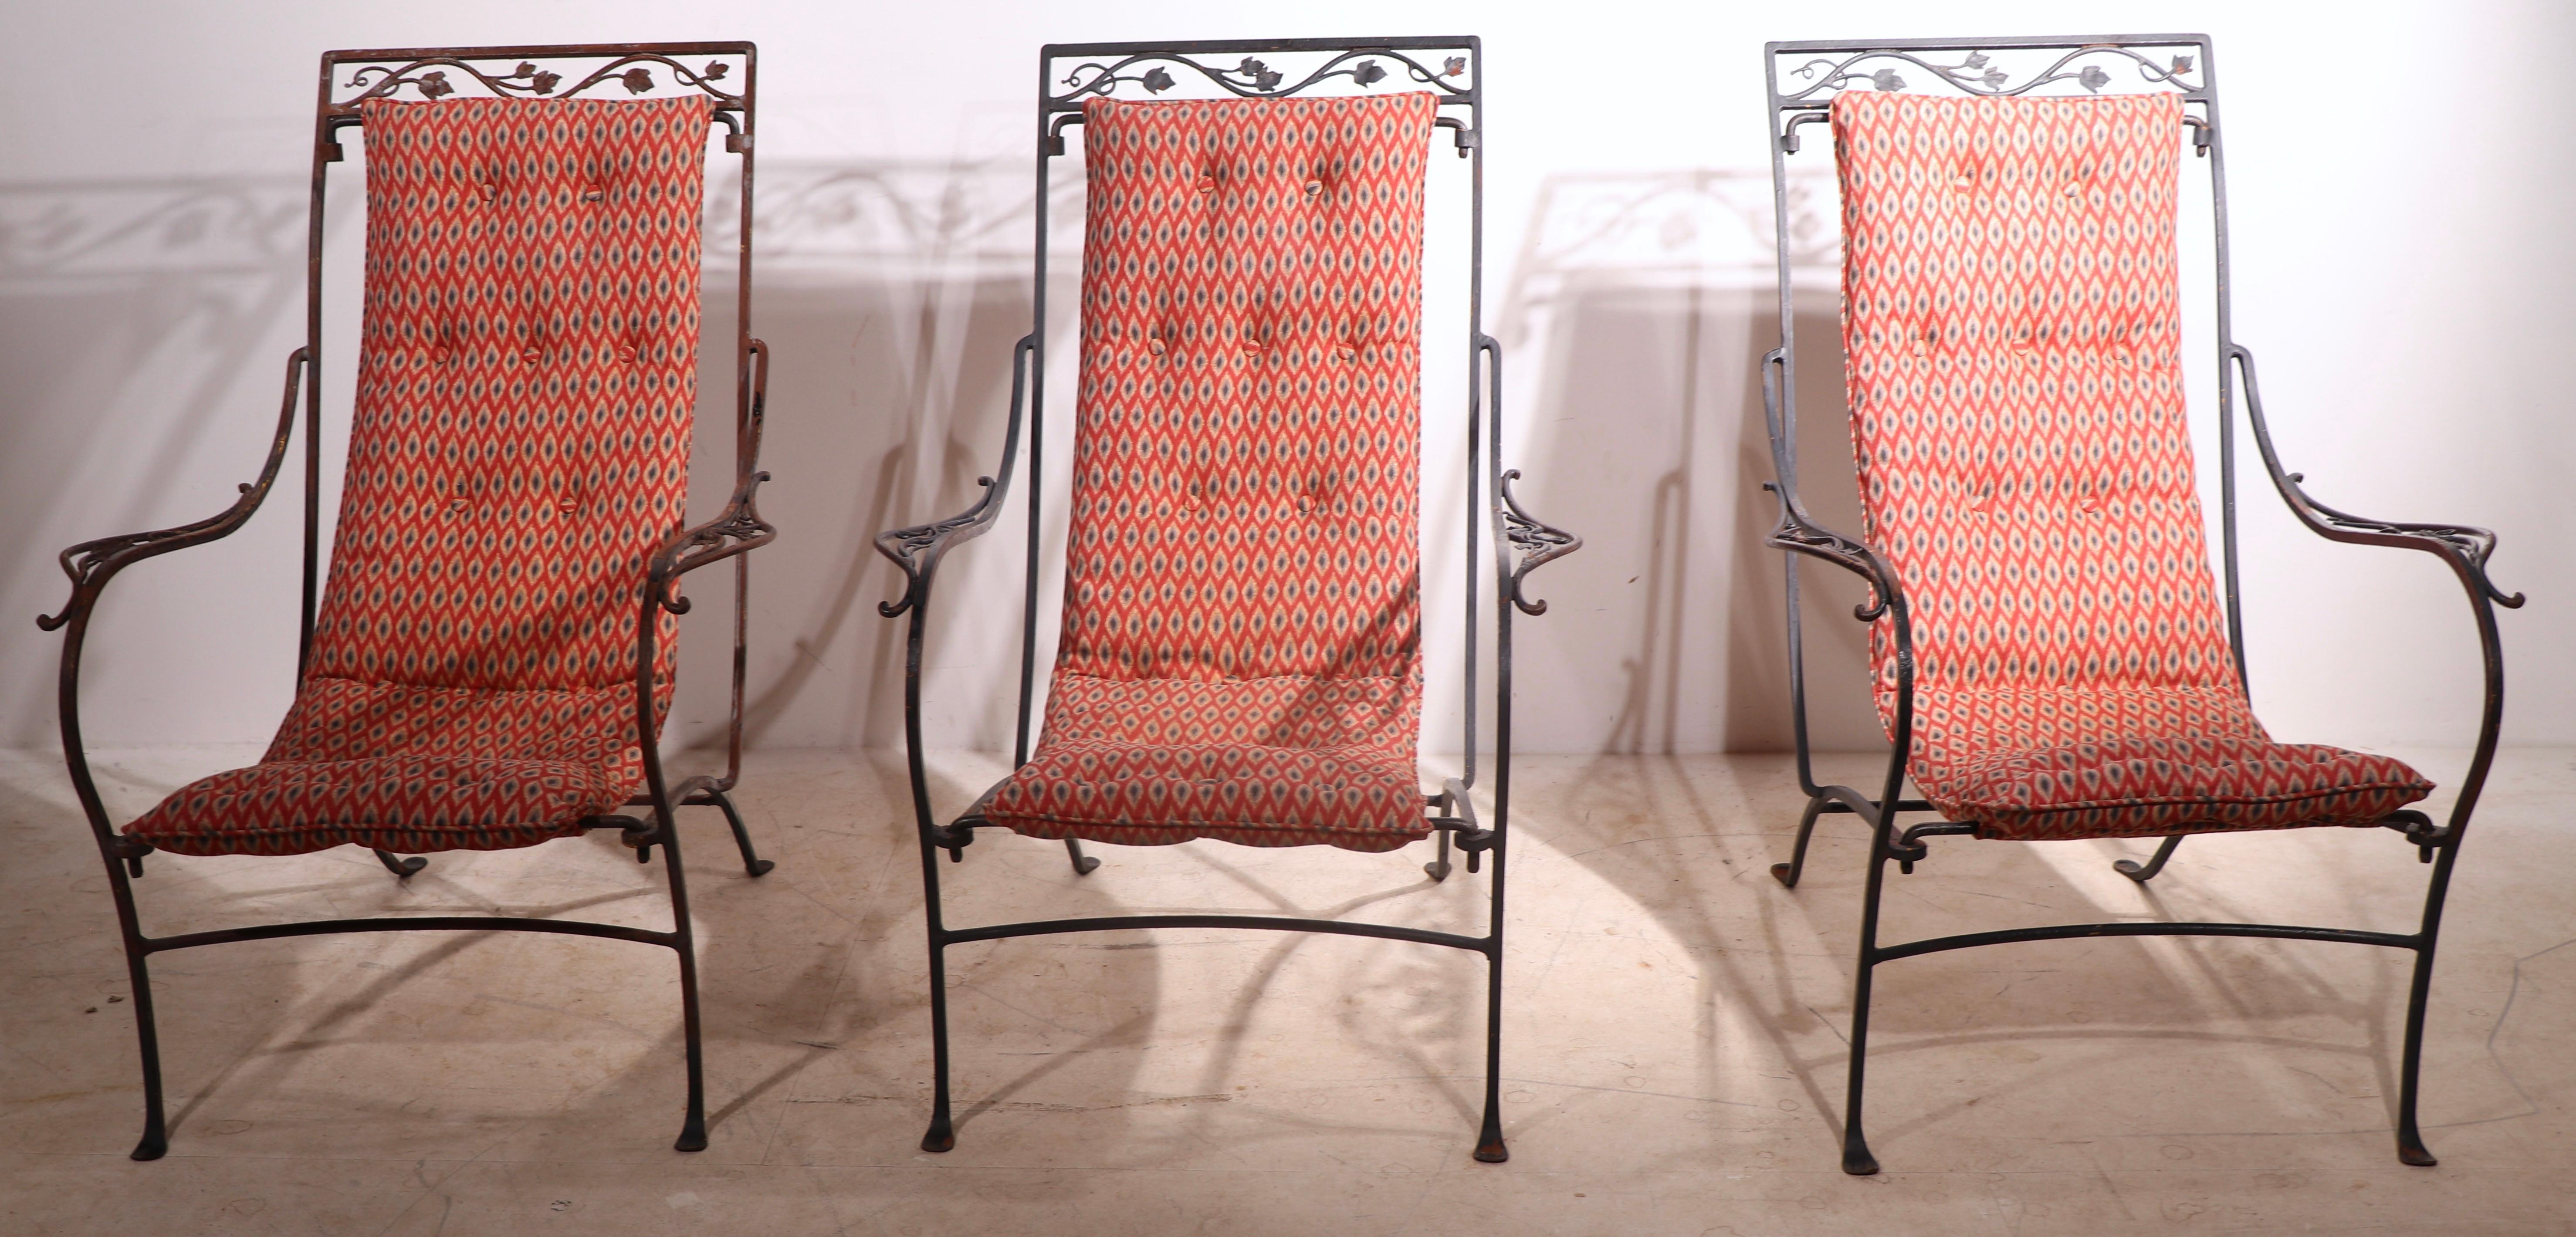 Voguish suite of three sling seat lounge chairs by noted garden furniture maker, Salterini. The chais features a suspended upholstered continuous back, seat rest in original diamond pattern fabric, on exquisite hand wrought frames. All three are in